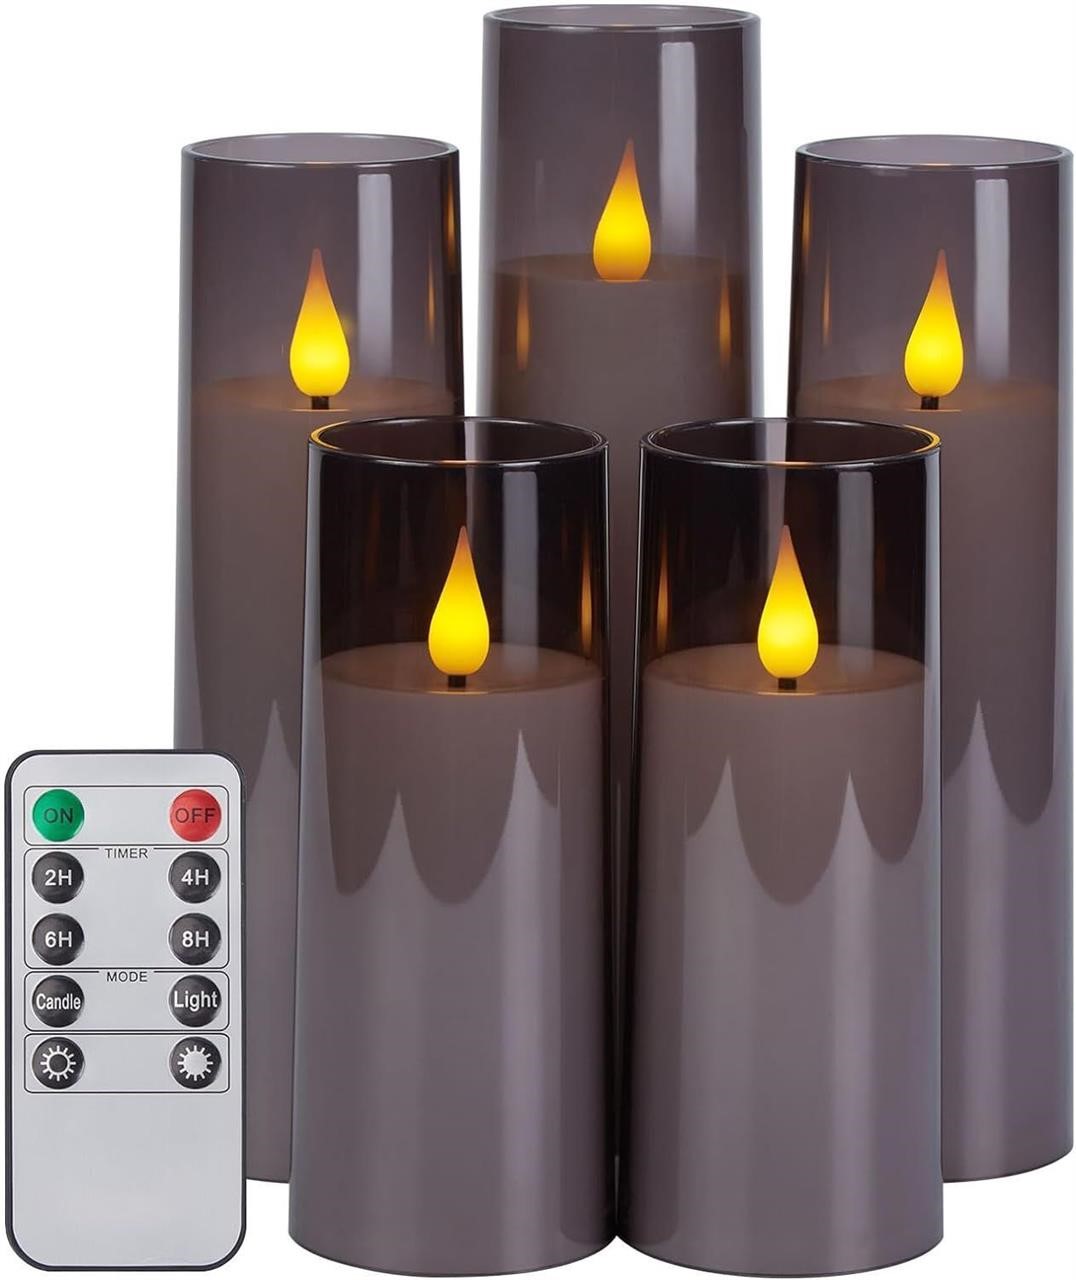 NEW $32 5PK Flameless Candles w/Remote *Damage